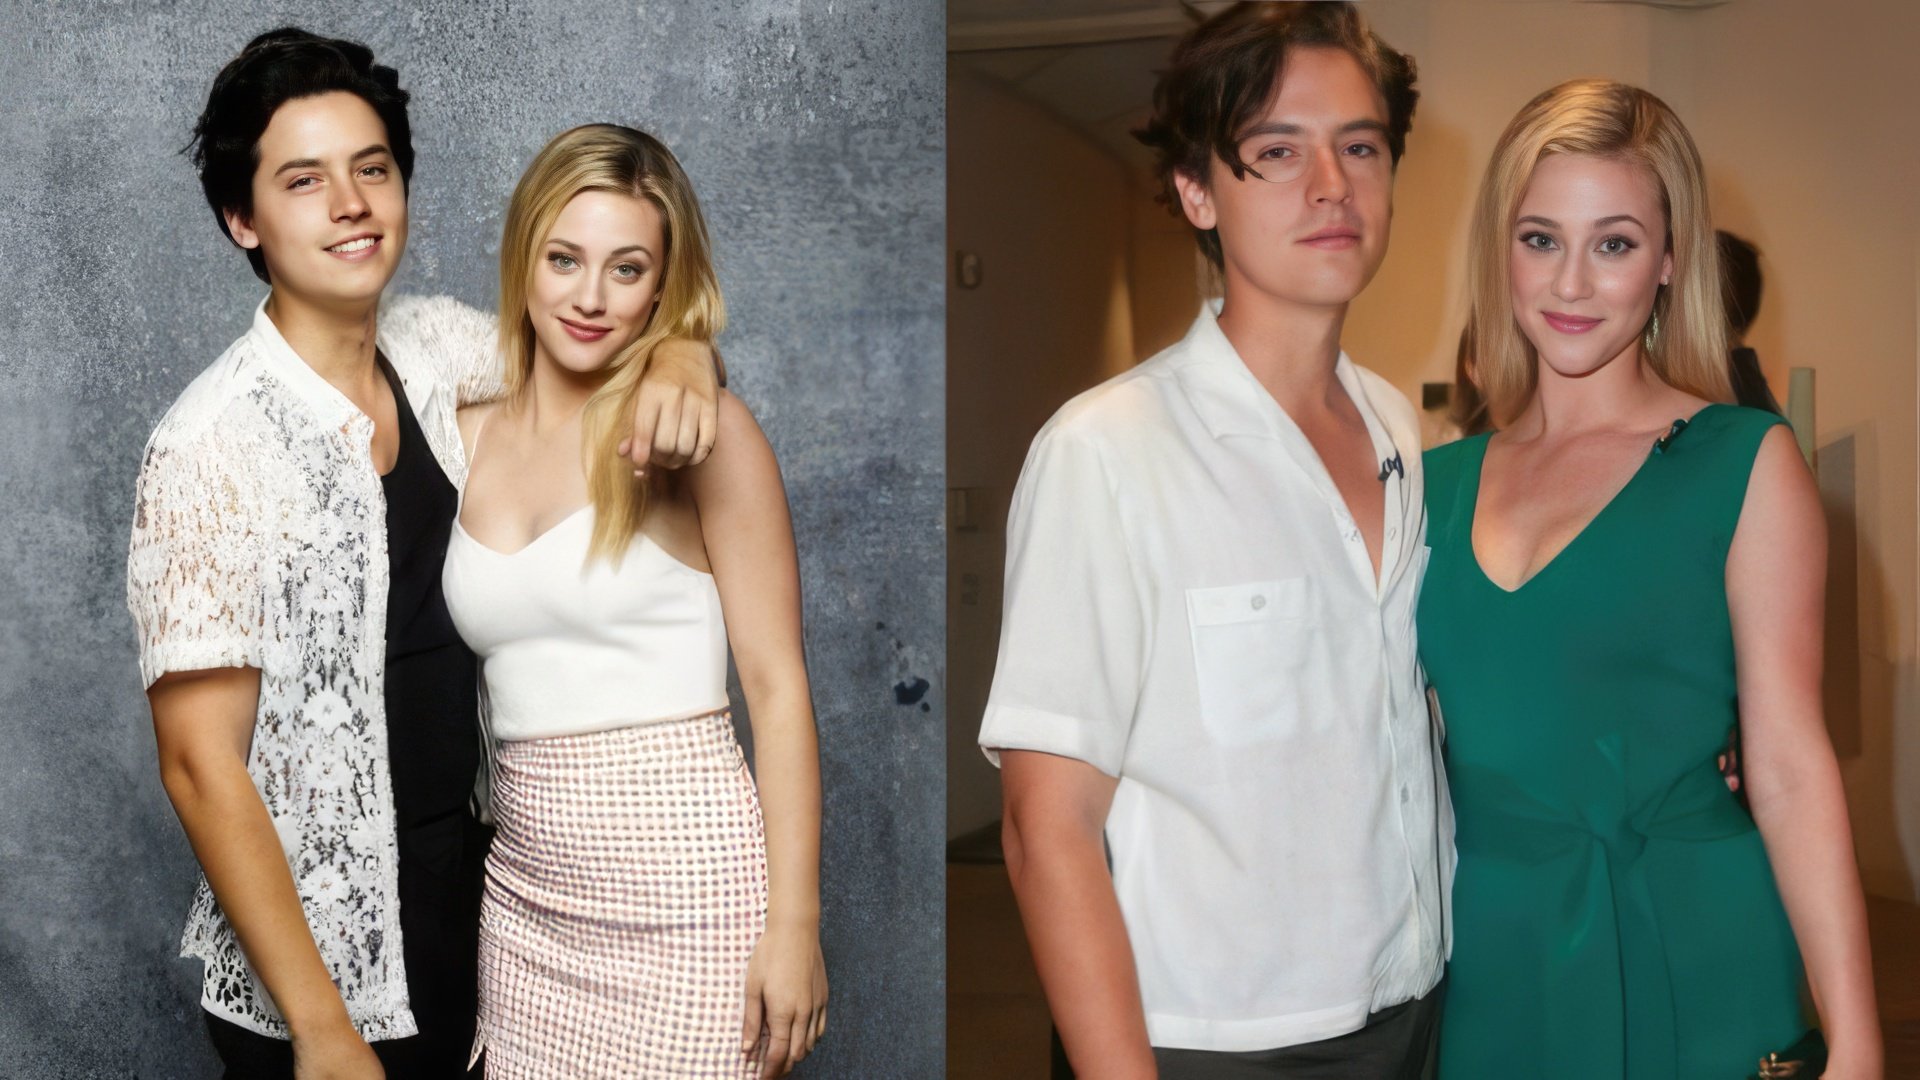 Cole Sprous and his girlfriend Lili Reinhart